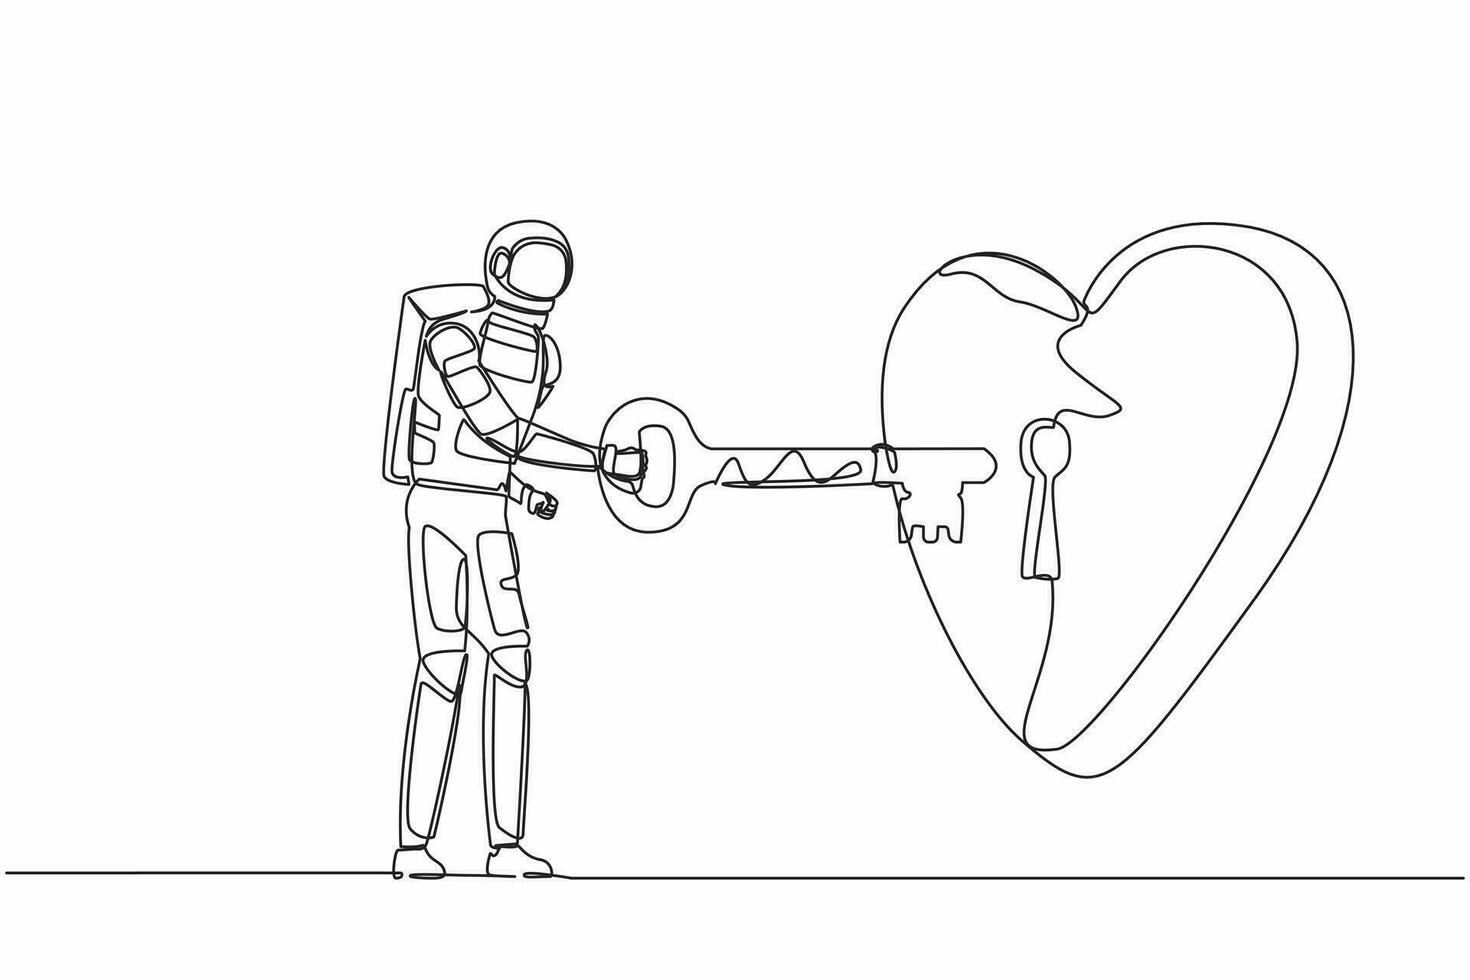 Single one line drawing young astronaut putting key into heart in moon surface. Spaceman love to galactic or planet exploration. Cosmic galaxy space. Continuous line graphic design vector illustration